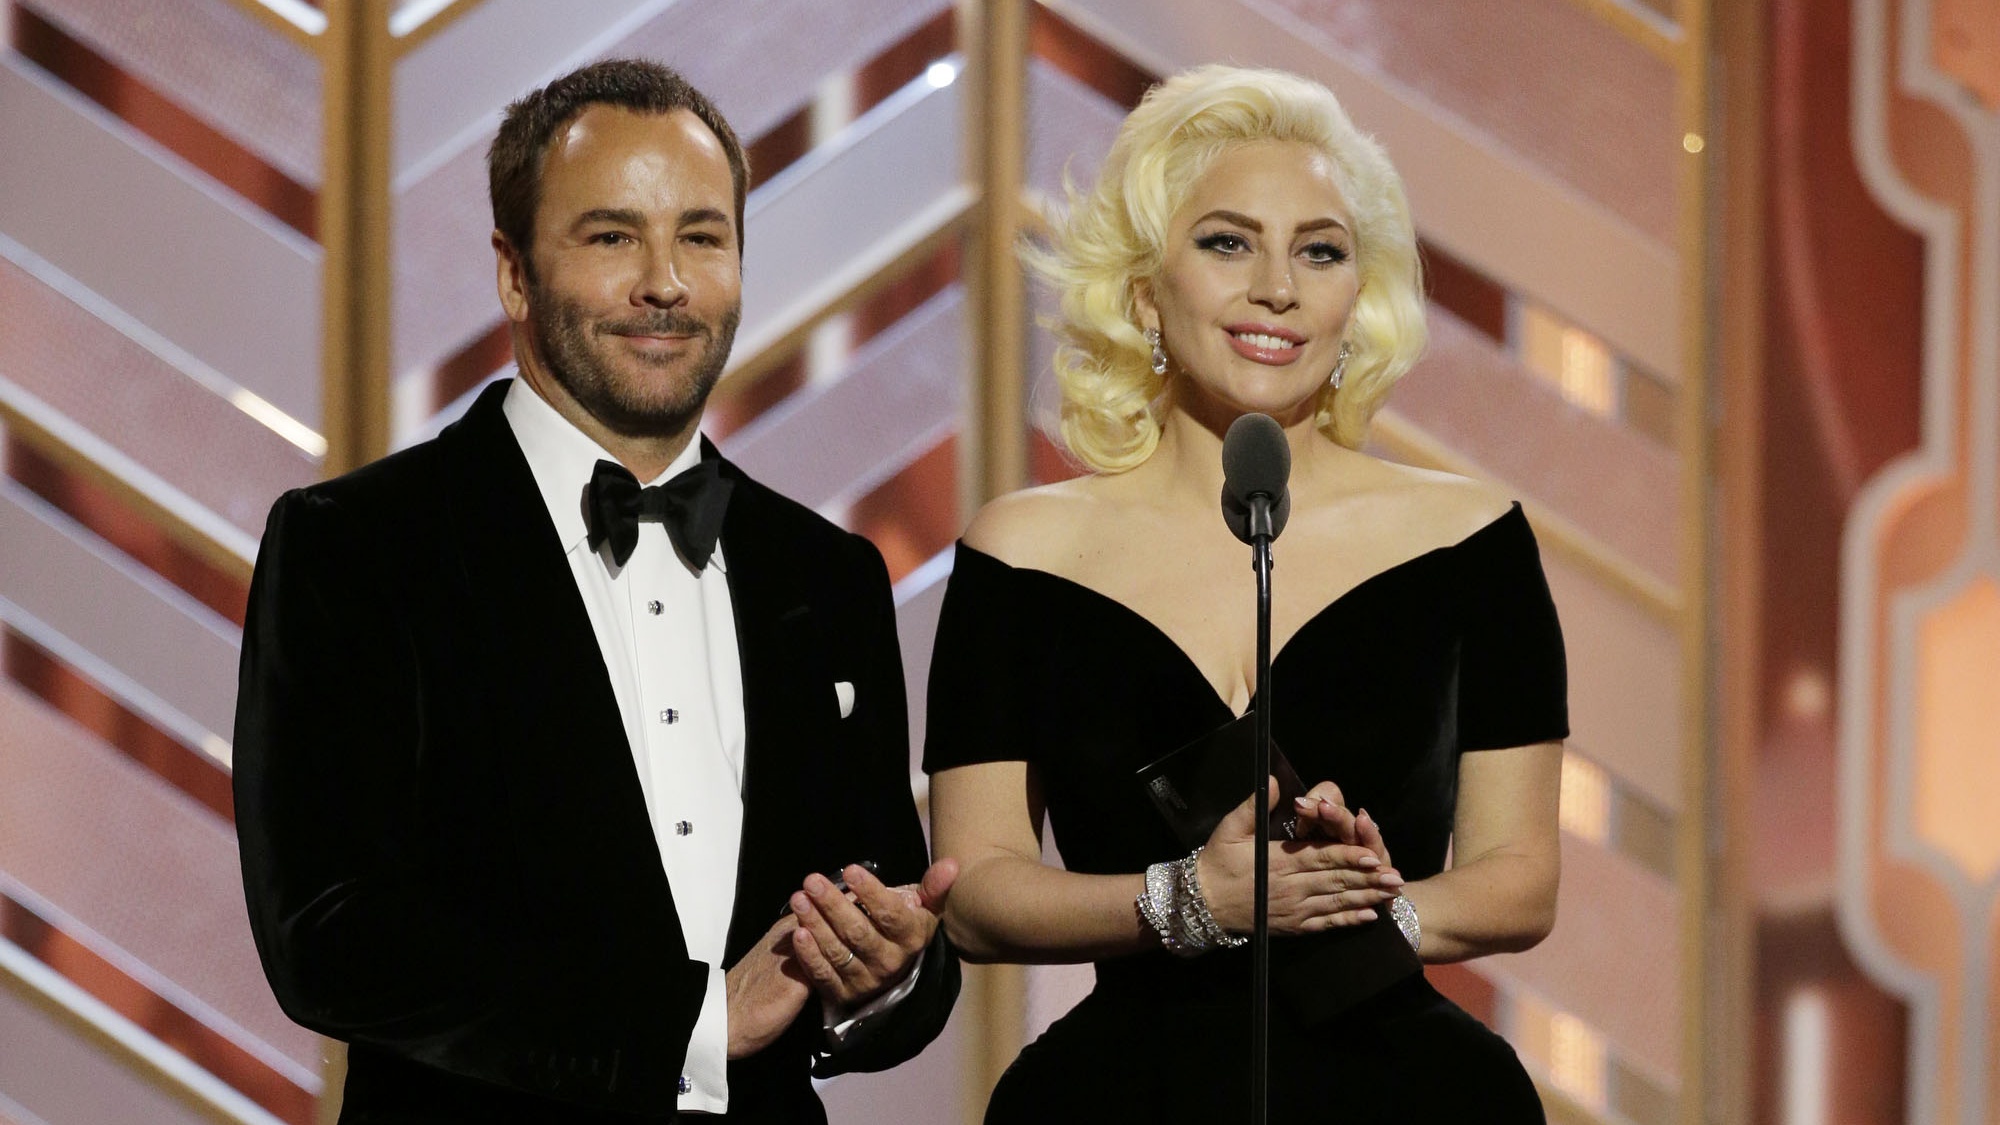 Tom Ford Really Didn't Like “House of Gucci” But Raved About Lady Gaga